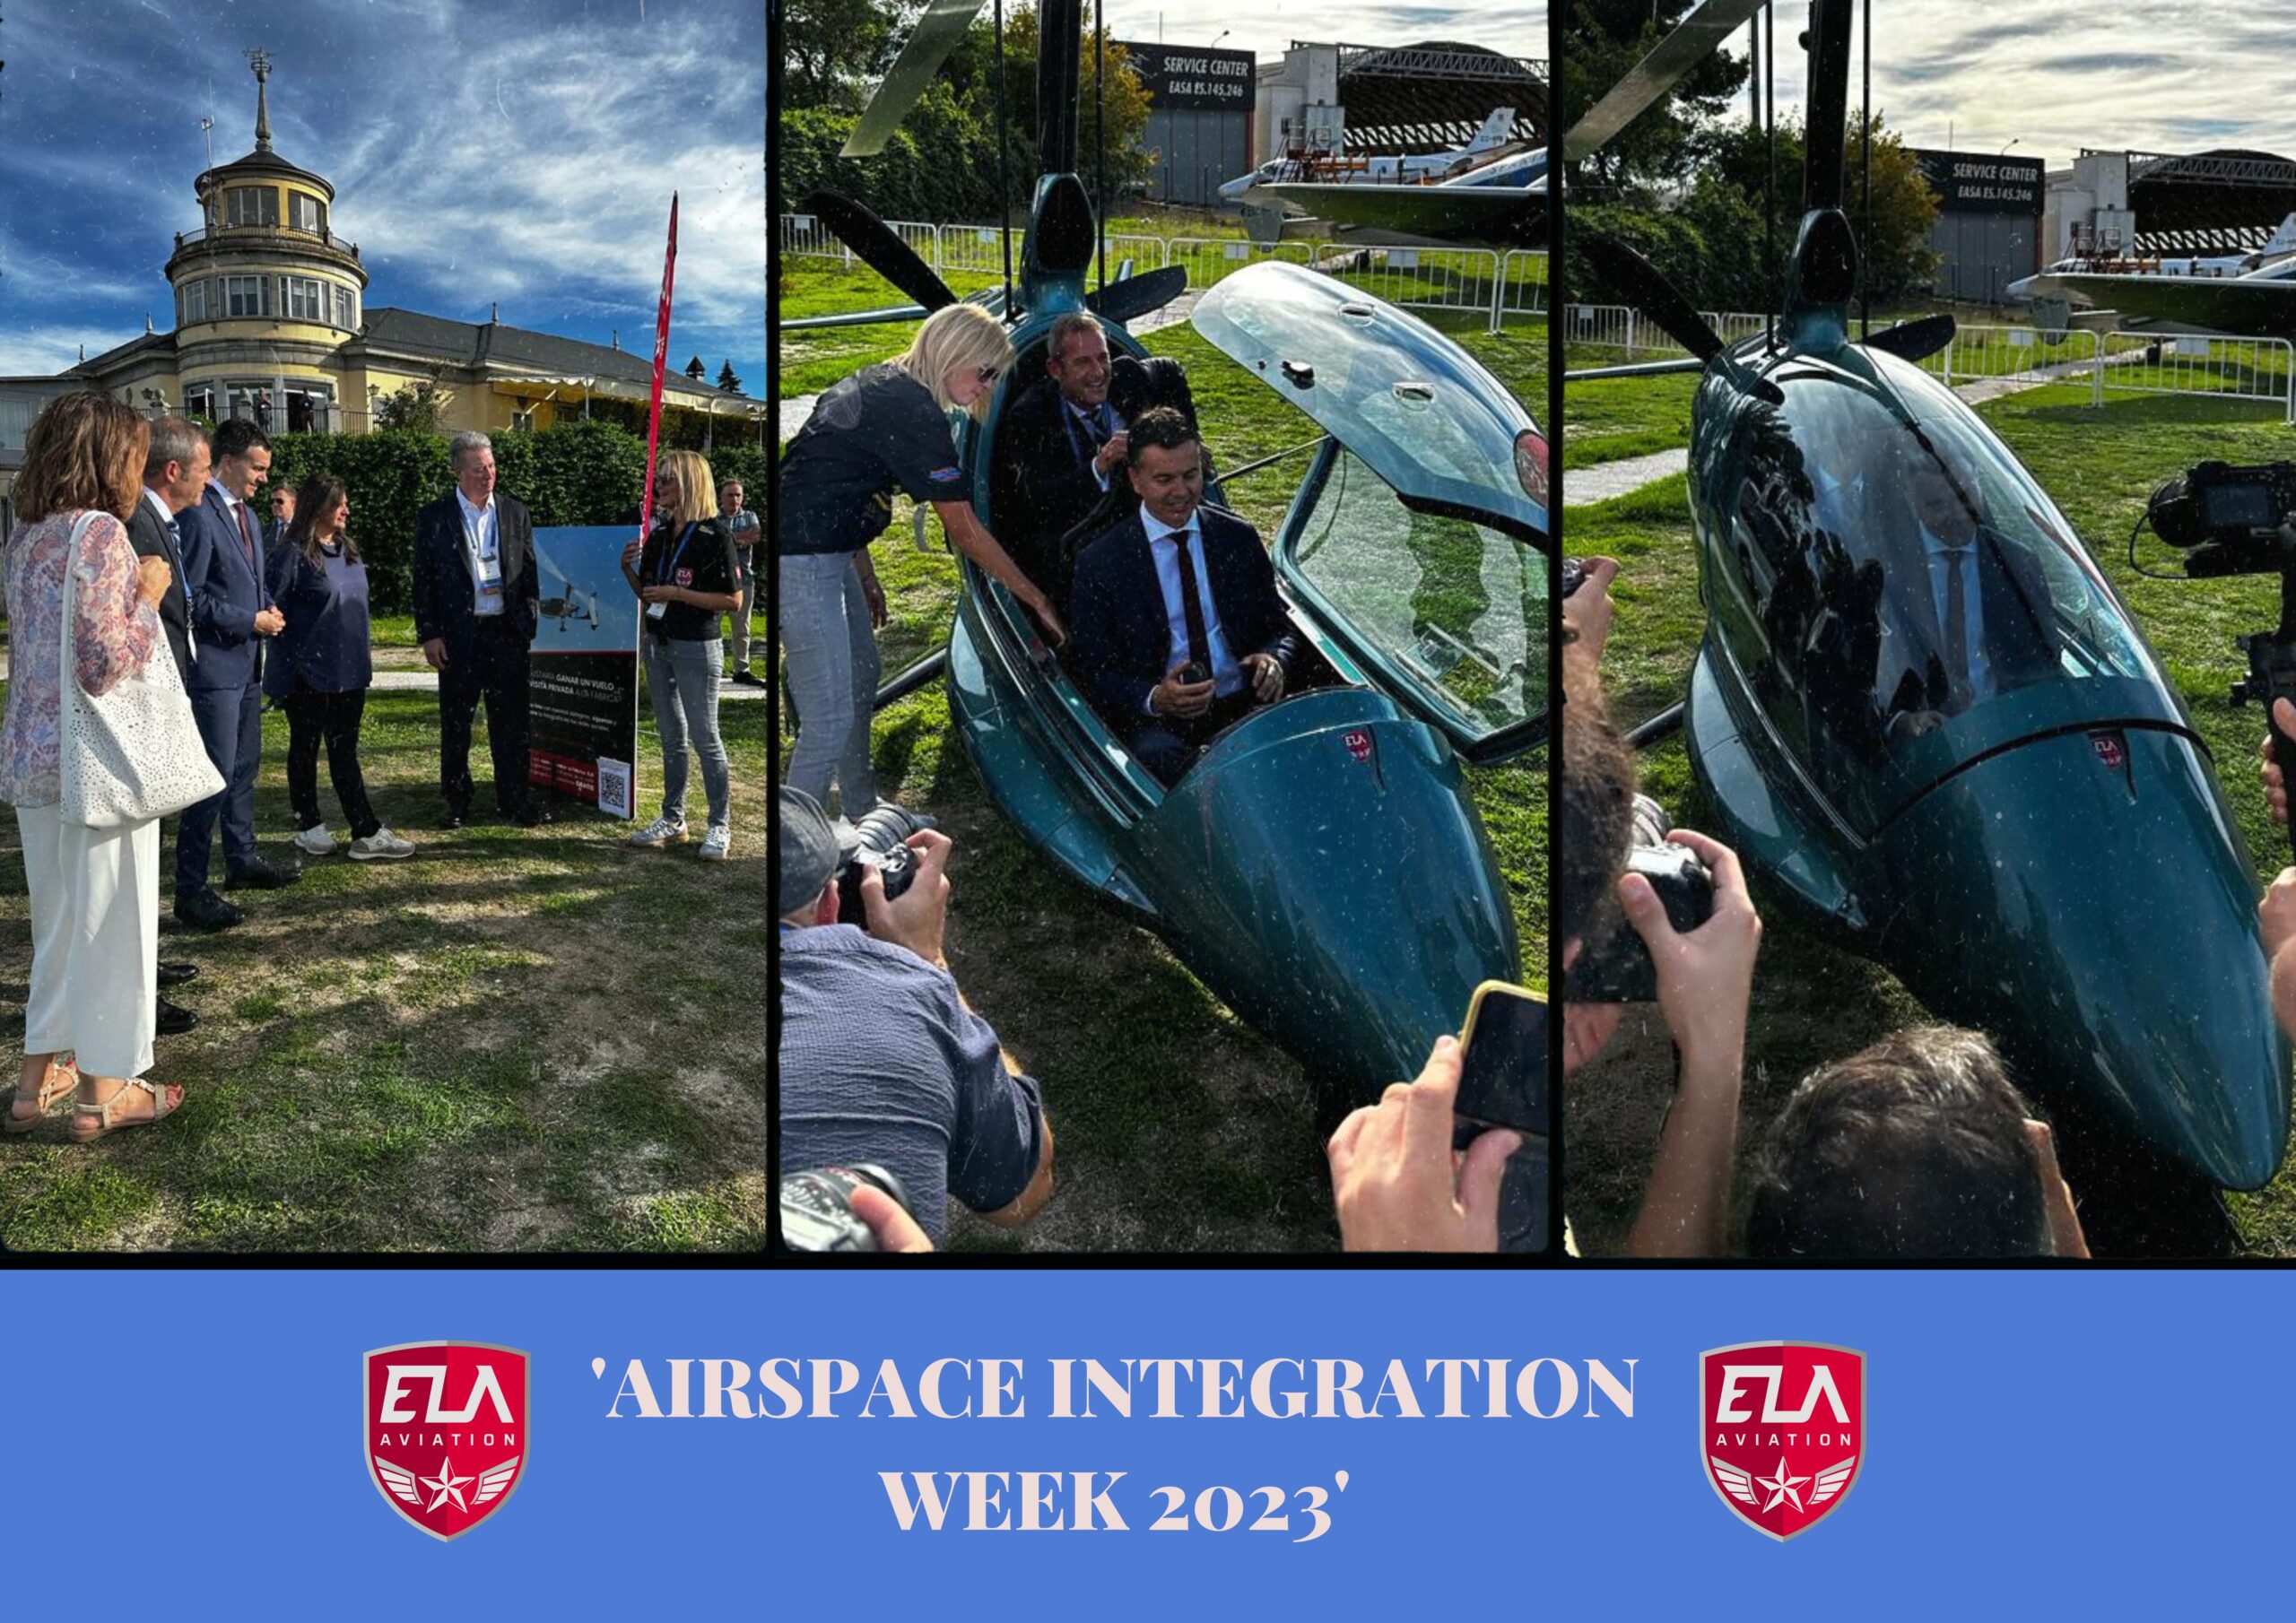 “ELA Aviación Shines at Madrid’s ‘Airspace Integration Week’ with Strong Support from the Minister of Industry”